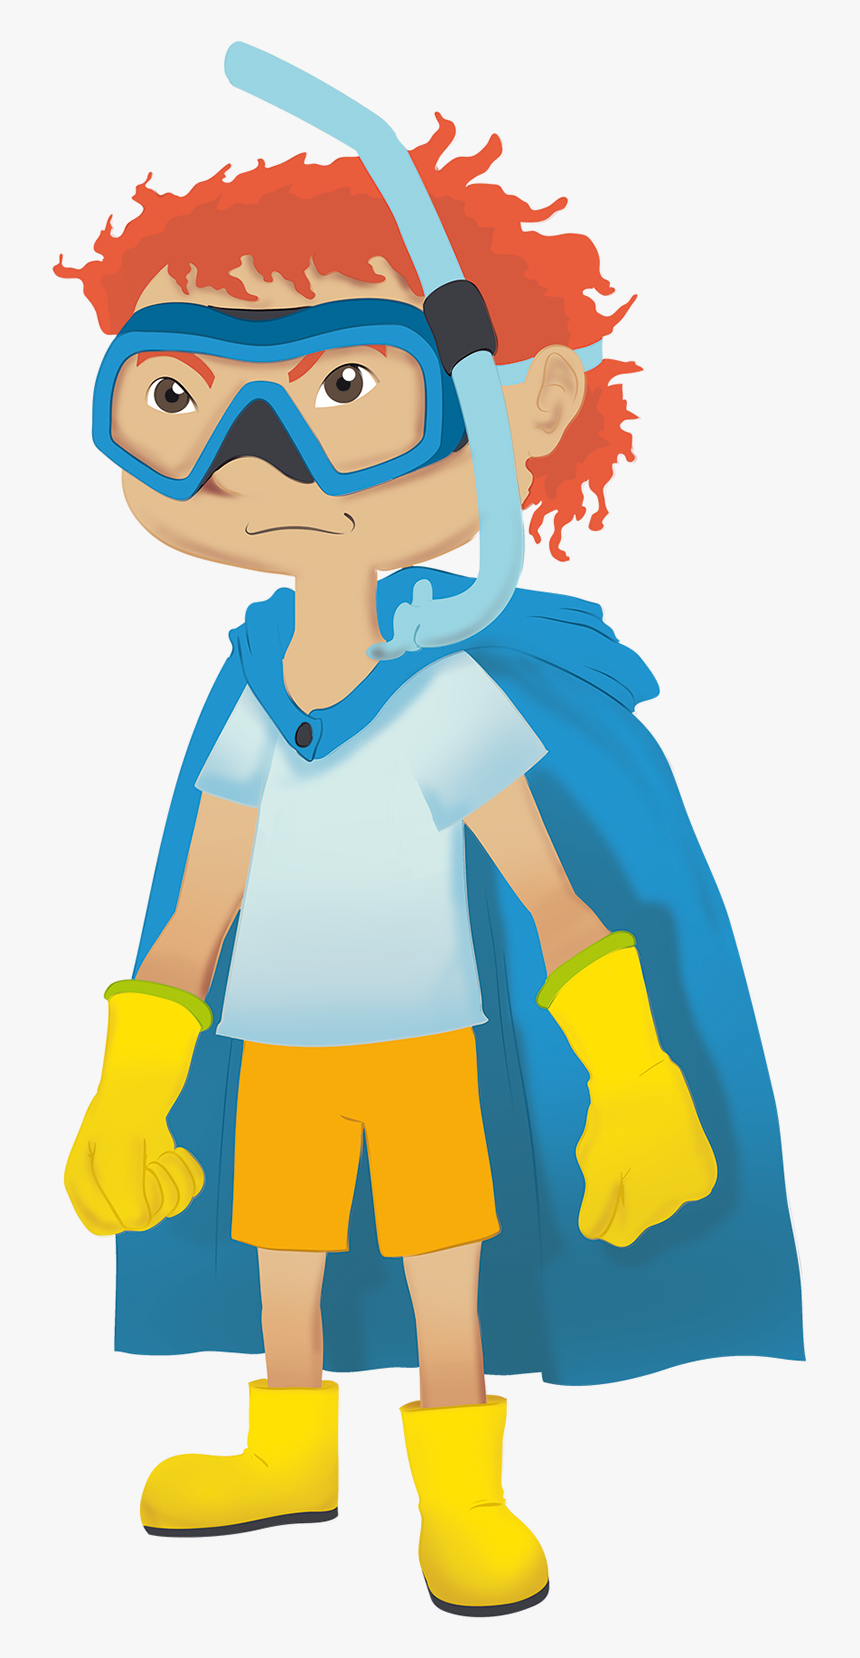 Could Turn Into “element Superheroes” With Outfits - Cartoon, HD Png Download, Free Download